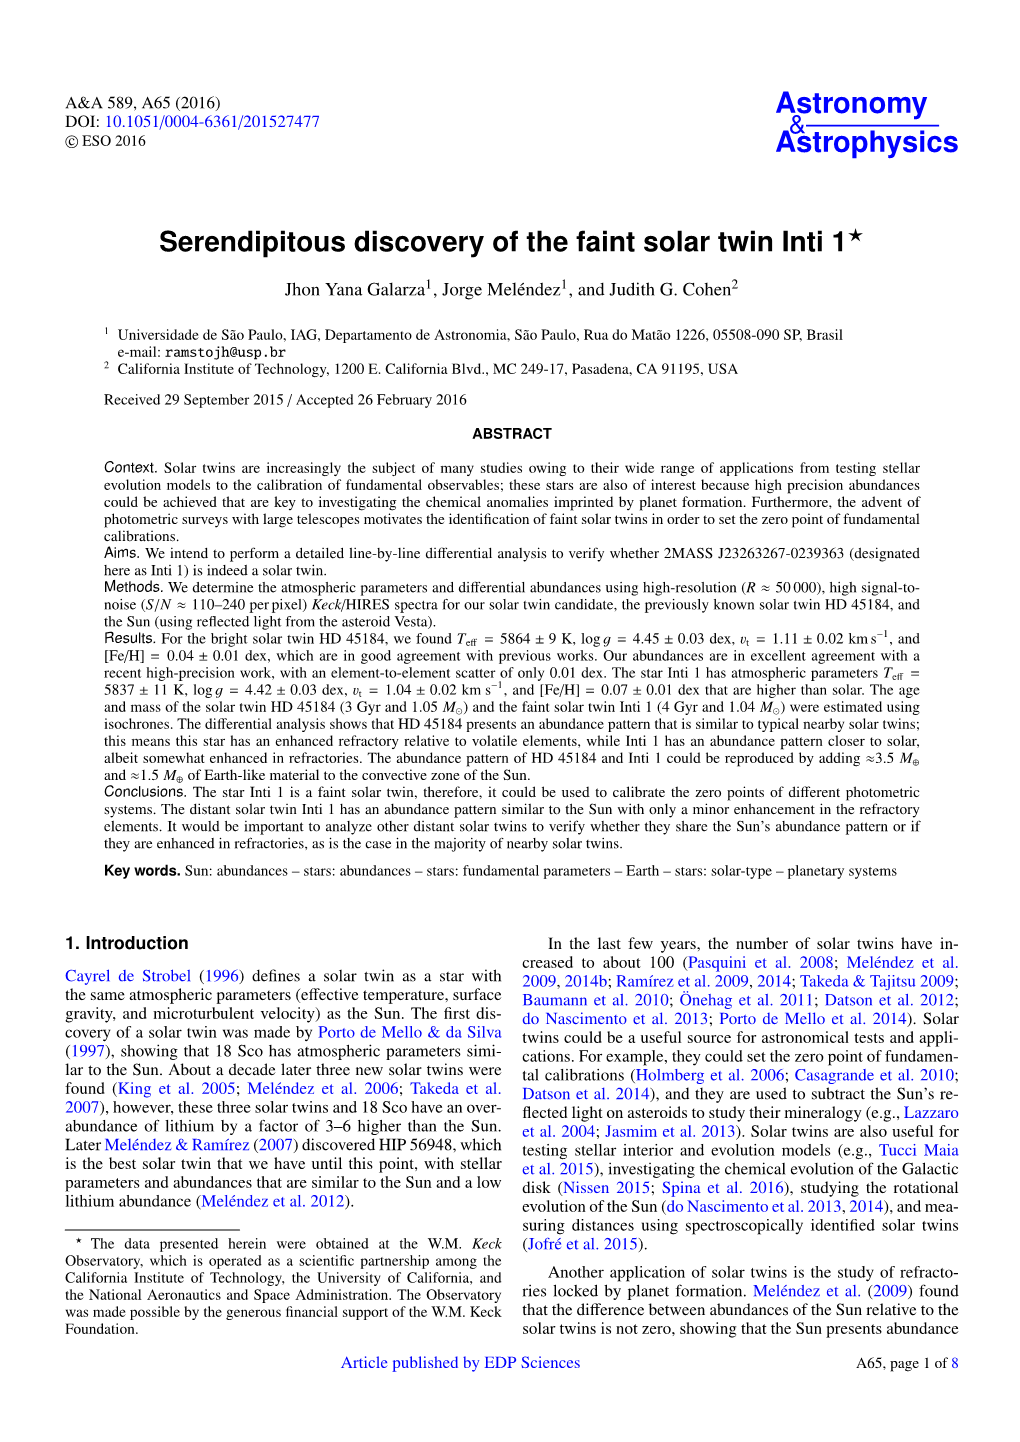 Serendipitous Discovery of the Faint Solar Twin Inti 1?